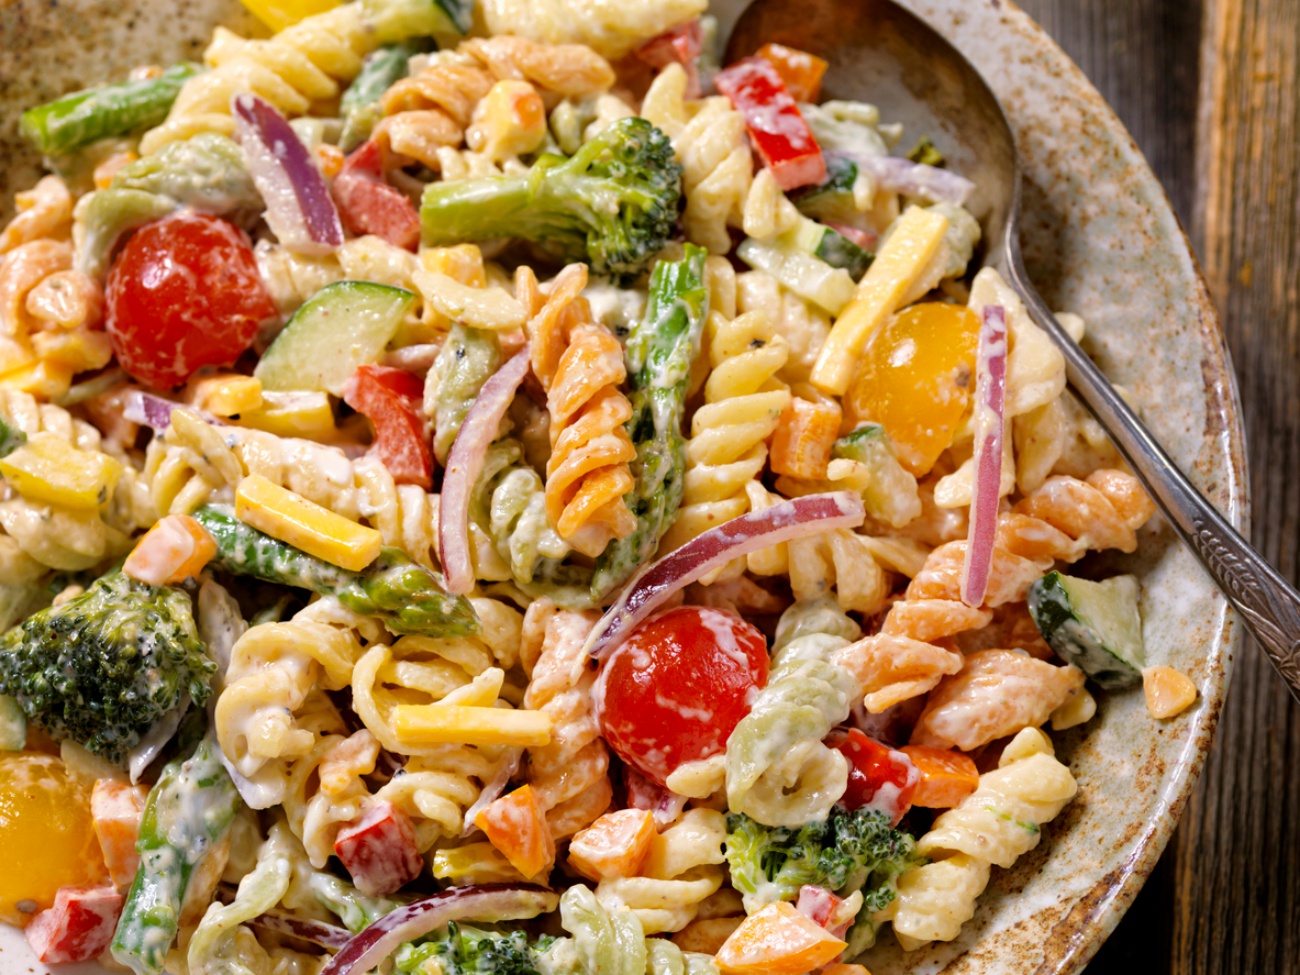 Creamy Pasta and Vegetable Salad